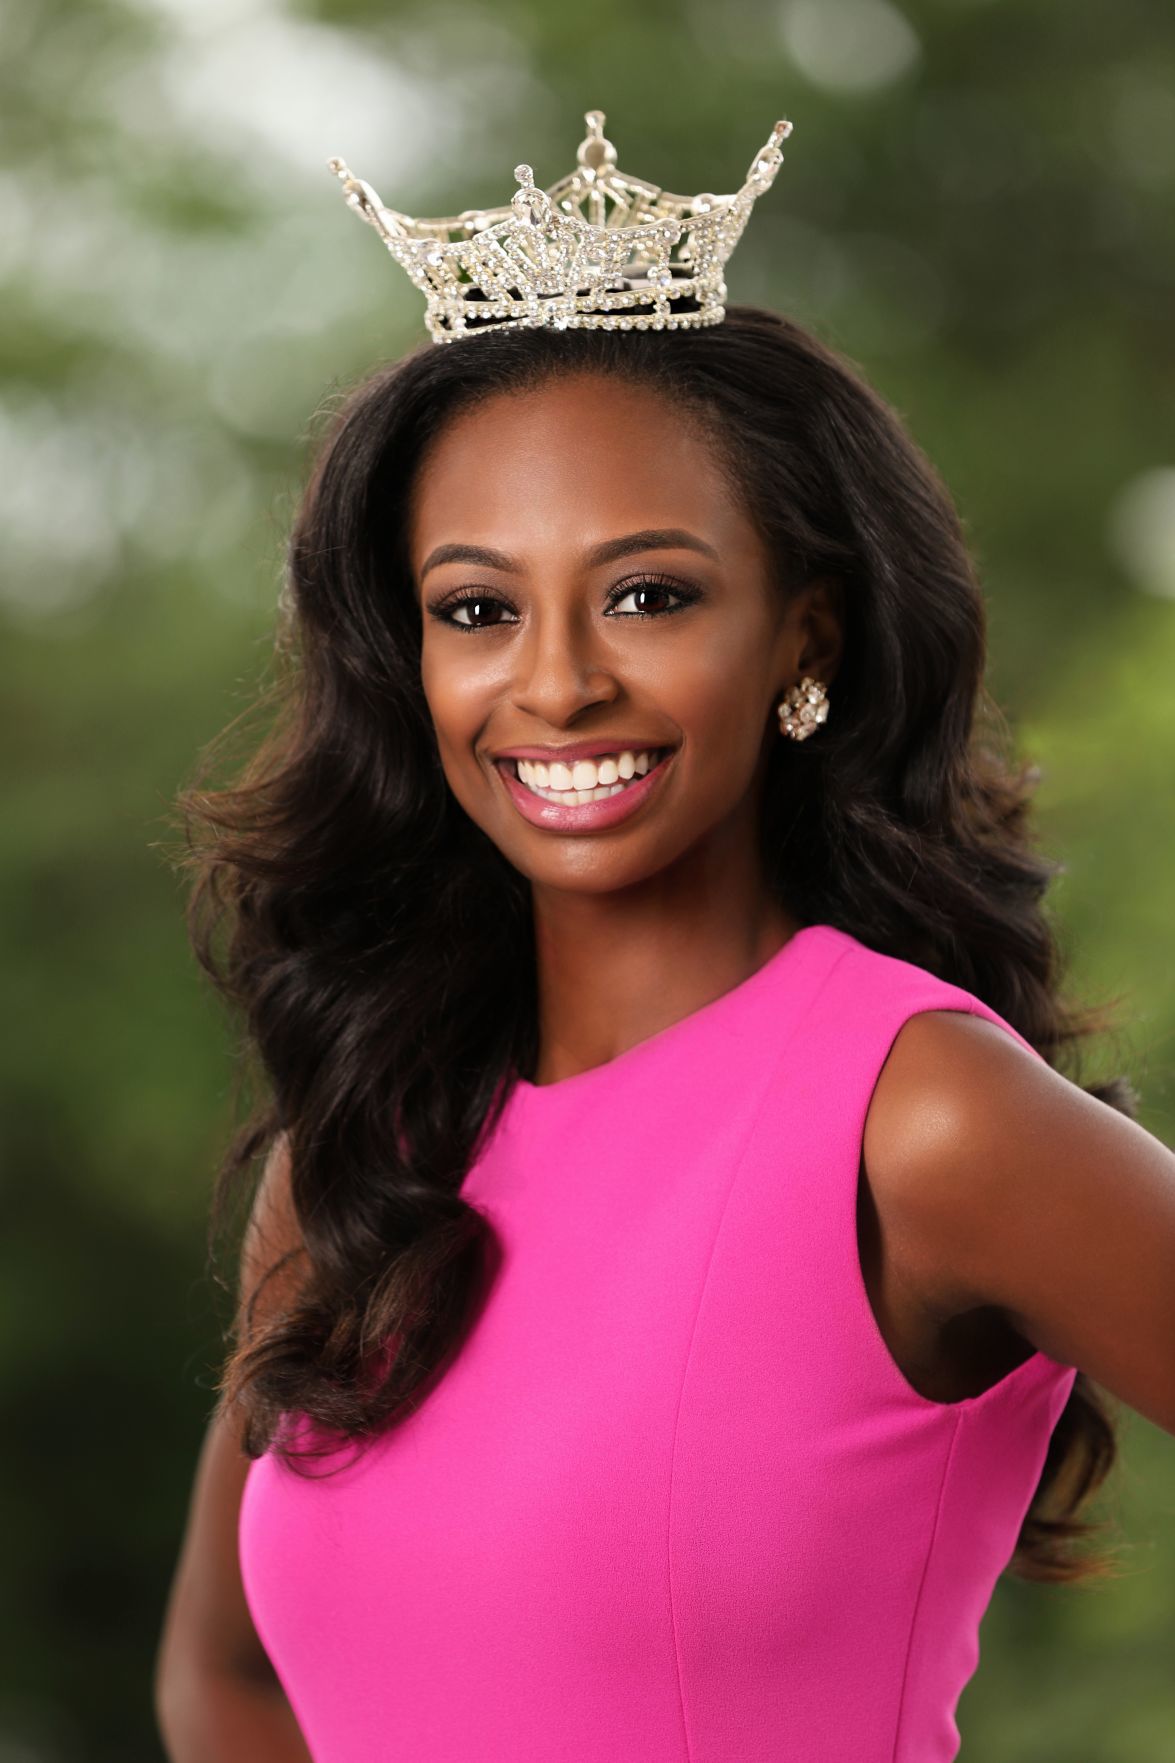 Was there ever a black Miss South Carolina?